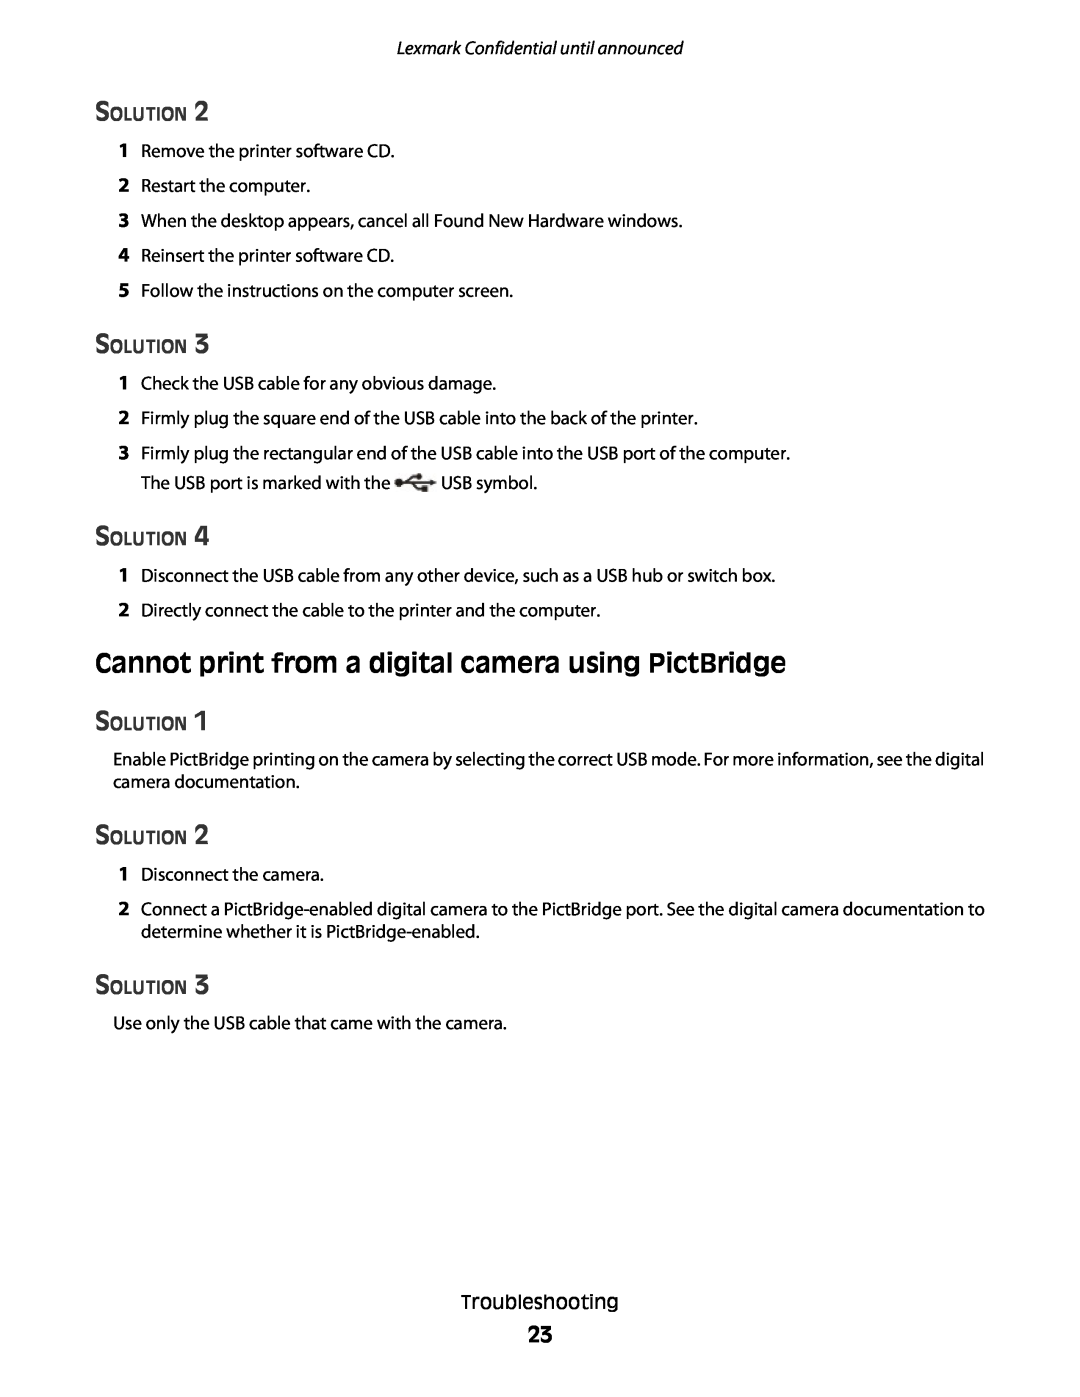 Lexmark P200 manual Cannot print from a digital camera using PictBridge, Lexmark Confidential until announced, Solution 